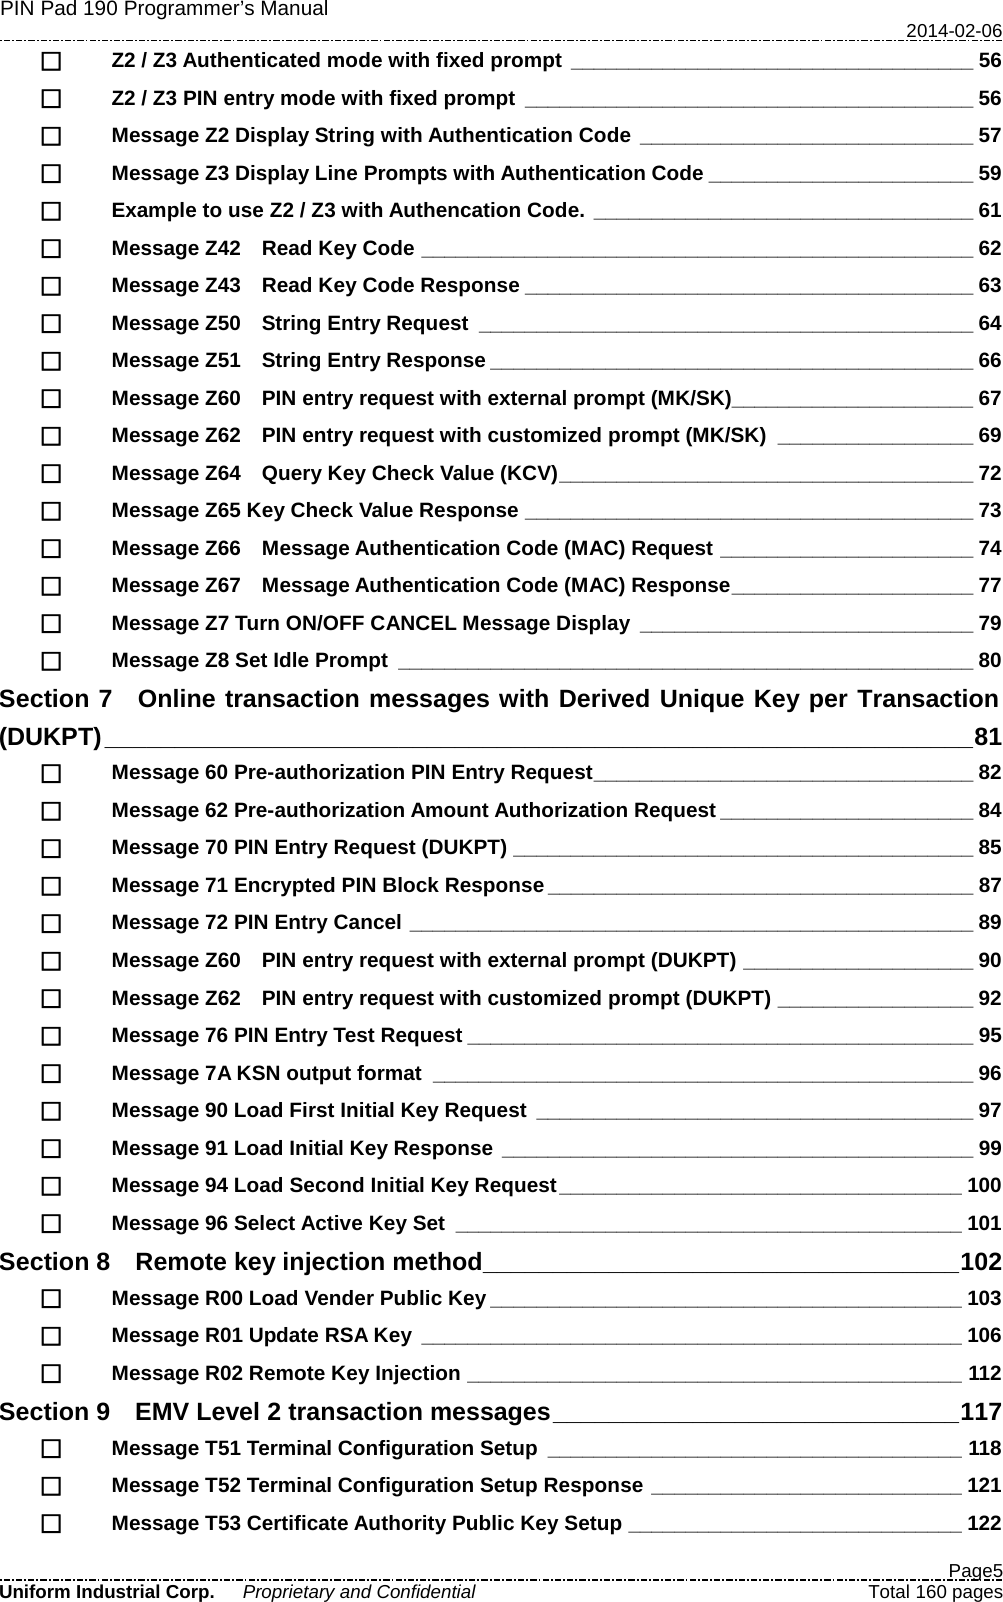 PIN Pad 190 Programmer’s Manual   2014-02-06  Page5 Uniform Industrial Corp. Proprietary and Confidential  Total 160 pages  Z2 / Z3 Authenticated mode with fixed prompt ___________________________________ 56  Z2 / Z3 PIN entry mode with fixed prompt _______________________________________ 56  Message Z2 Display String with Authentication Code _____________________________ 57  Message Z3 Display Line Prompts with Authentication Code _______________________ 59  Example to use Z2 / Z3 with Authencation Code. _________________________________ 61  Message Z42    Read Key Code ________________________________________________ 62  Message Z43    Read Key Code Response _______________________________________ 63  Message Z50    String Entry Request ___________________________________________ 64  Message Z51    String Entry Response __________________________________________ 66  Message Z60    PIN entry request with external prompt (MK/SK)_____________________ 67  Message Z62    PIN entry request with customized prompt (MK/SK) _________________ 69  Message Z64    Query Key Check Value (KCV) ____________________________________ 72  Message Z65 Key Check Value Response _______________________________________ 73  Message Z66    Message Authentication Code (MAC) Request ______________________ 74  Message Z67    Message Authentication Code (MAC) Response _____________________ 77  Message Z7 Turn ON/OFF CANCEL Message Display _____________________________ 79  Message Z8 Set Idle Prompt __________________________________________________ 80 Section 7  Online transaction messages with Derived Unique Key per Transaction (DUKPT) ______________________________________________________________ 81  Message 60 Pre-authorization PIN Entry Request _________________________________ 82  Message 62 Pre-authorization Amount Authorization Request ______________________ 84  Message 70 PIN Entry Request (DUKPT) ________________________________________ 85  Message 71 Encrypted PIN Block Response _____________________________________ 87  Message 72 PIN Entry Cancel _________________________________________________ 89  Message Z60    PIN entry request with external prompt (DUKPT) ____________________ 90  Message Z62    PIN entry request with customized prompt (DUKPT) _________________ 92  Message 76 PIN Entry Test Request ____________________________________________ 95  Message 7A KSN output format _______________________________________________ 96  Message 90 Load First Initial Key Request ______________________________________ 97  Message 91 Load Initial Key Response _________________________________________ 99  Message 94 Load Second Initial Key Request ___________________________________ 100  Message 96 Select Active Key Set ____________________________________________ 101 Section 8    Remote key injection method __________________________________ 102  Message R00 Load Vender Public Key _________________________________________ 103  Message R01 Update RSA Key _______________________________________________ 106  Message R02 Remote Key Injection ___________________________________________ 112 Section 9    EMV Level 2 transaction messages _____________________________ 117  Message T51 Terminal Configuration Setup ____________________________________ 118  Message T52 Terminal Configuration Setup Response ___________________________ 121  Message T53 Certificate Authority Public Key Setup _____________________________ 122 